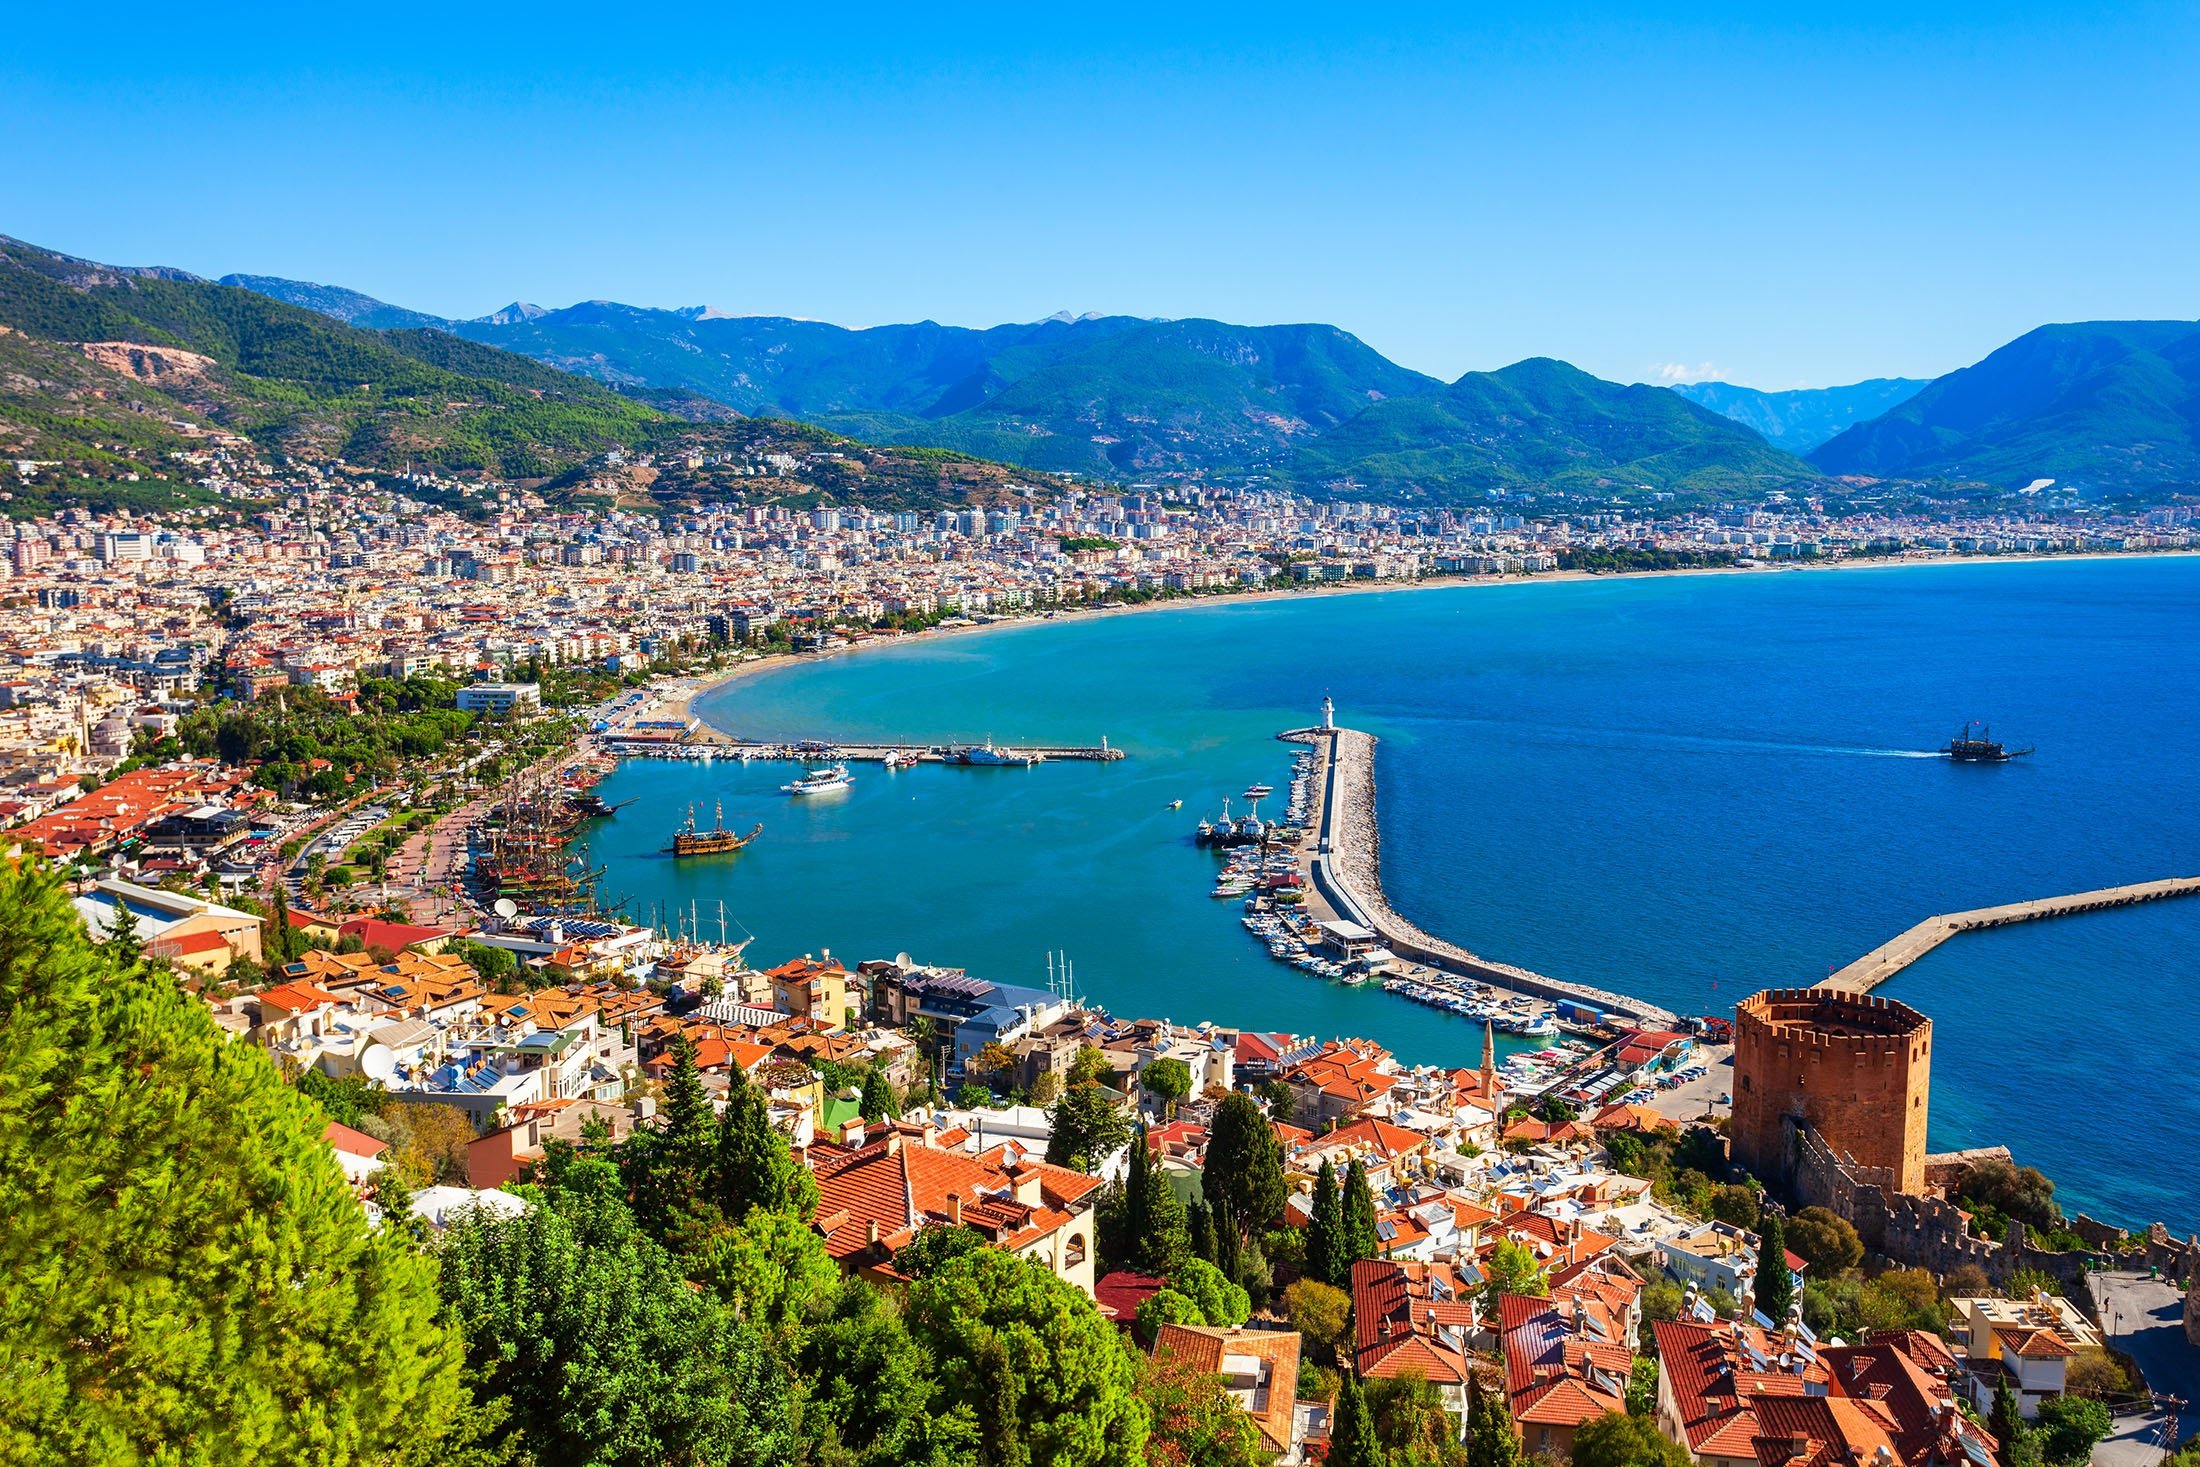 The sprawling resort town of Antalya lies to the east on the Mediterranean coast.  (Photo Shutterstock)